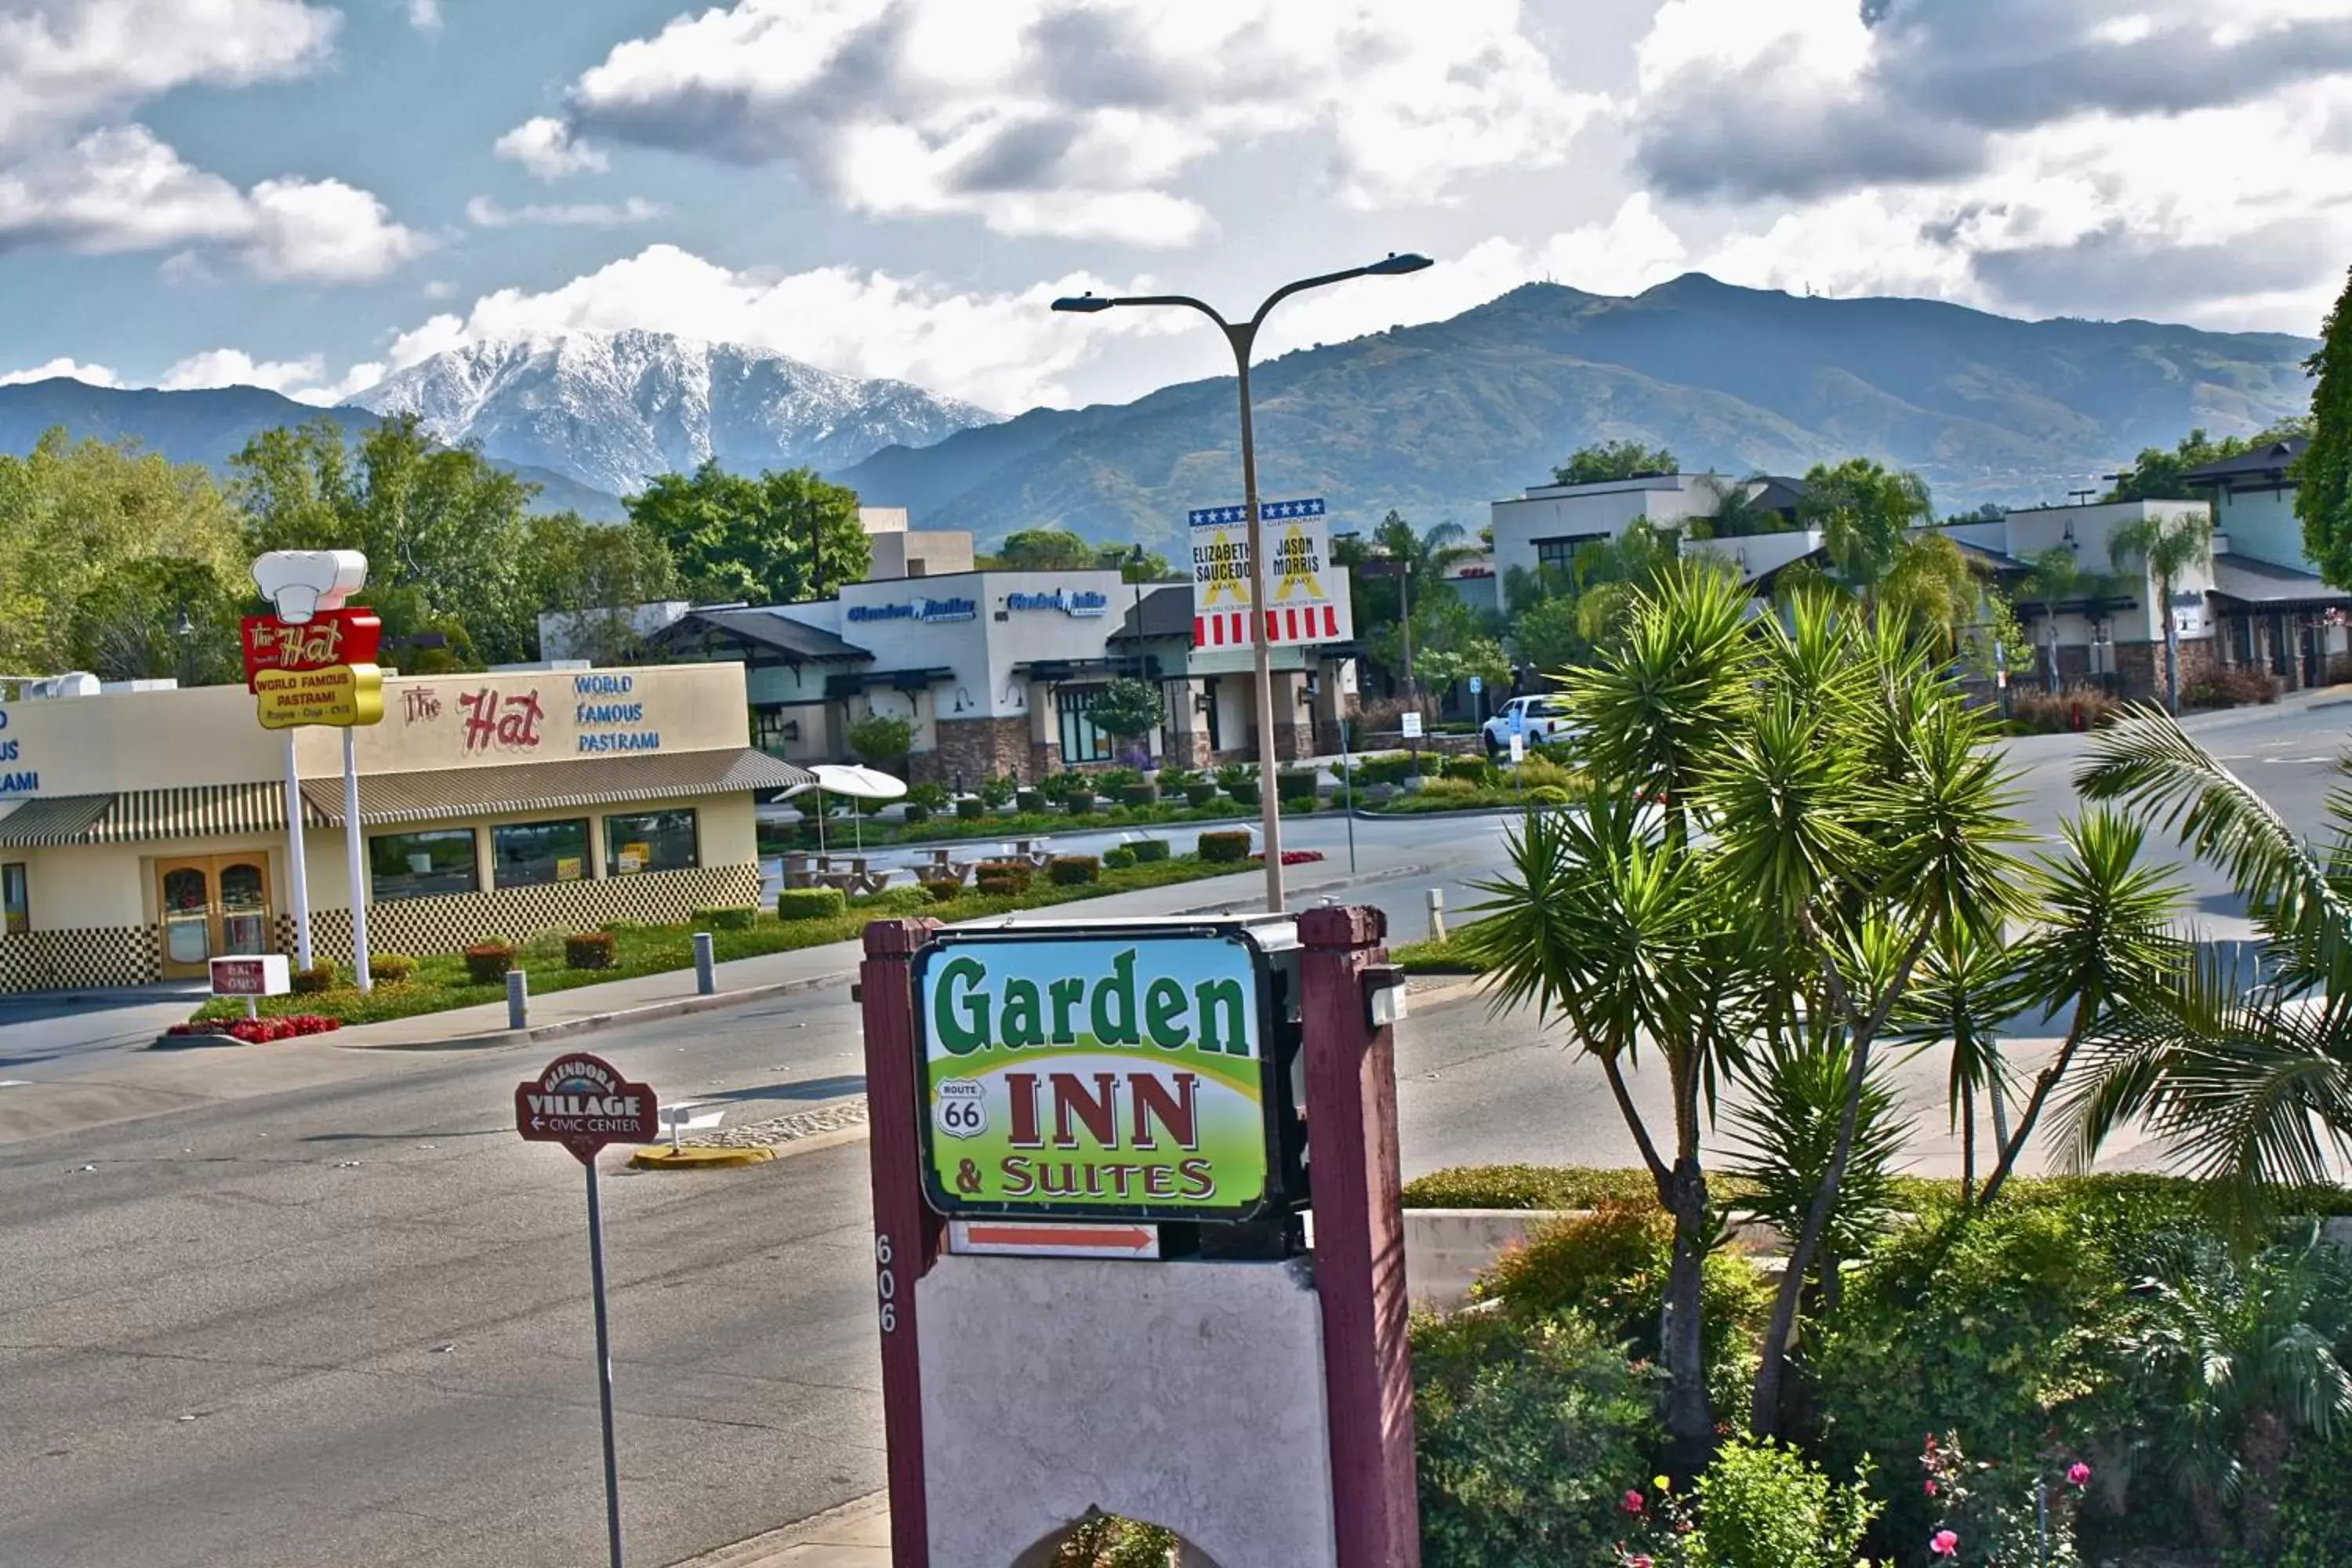 Area and facilities in Garden Inn and Suites Glendora